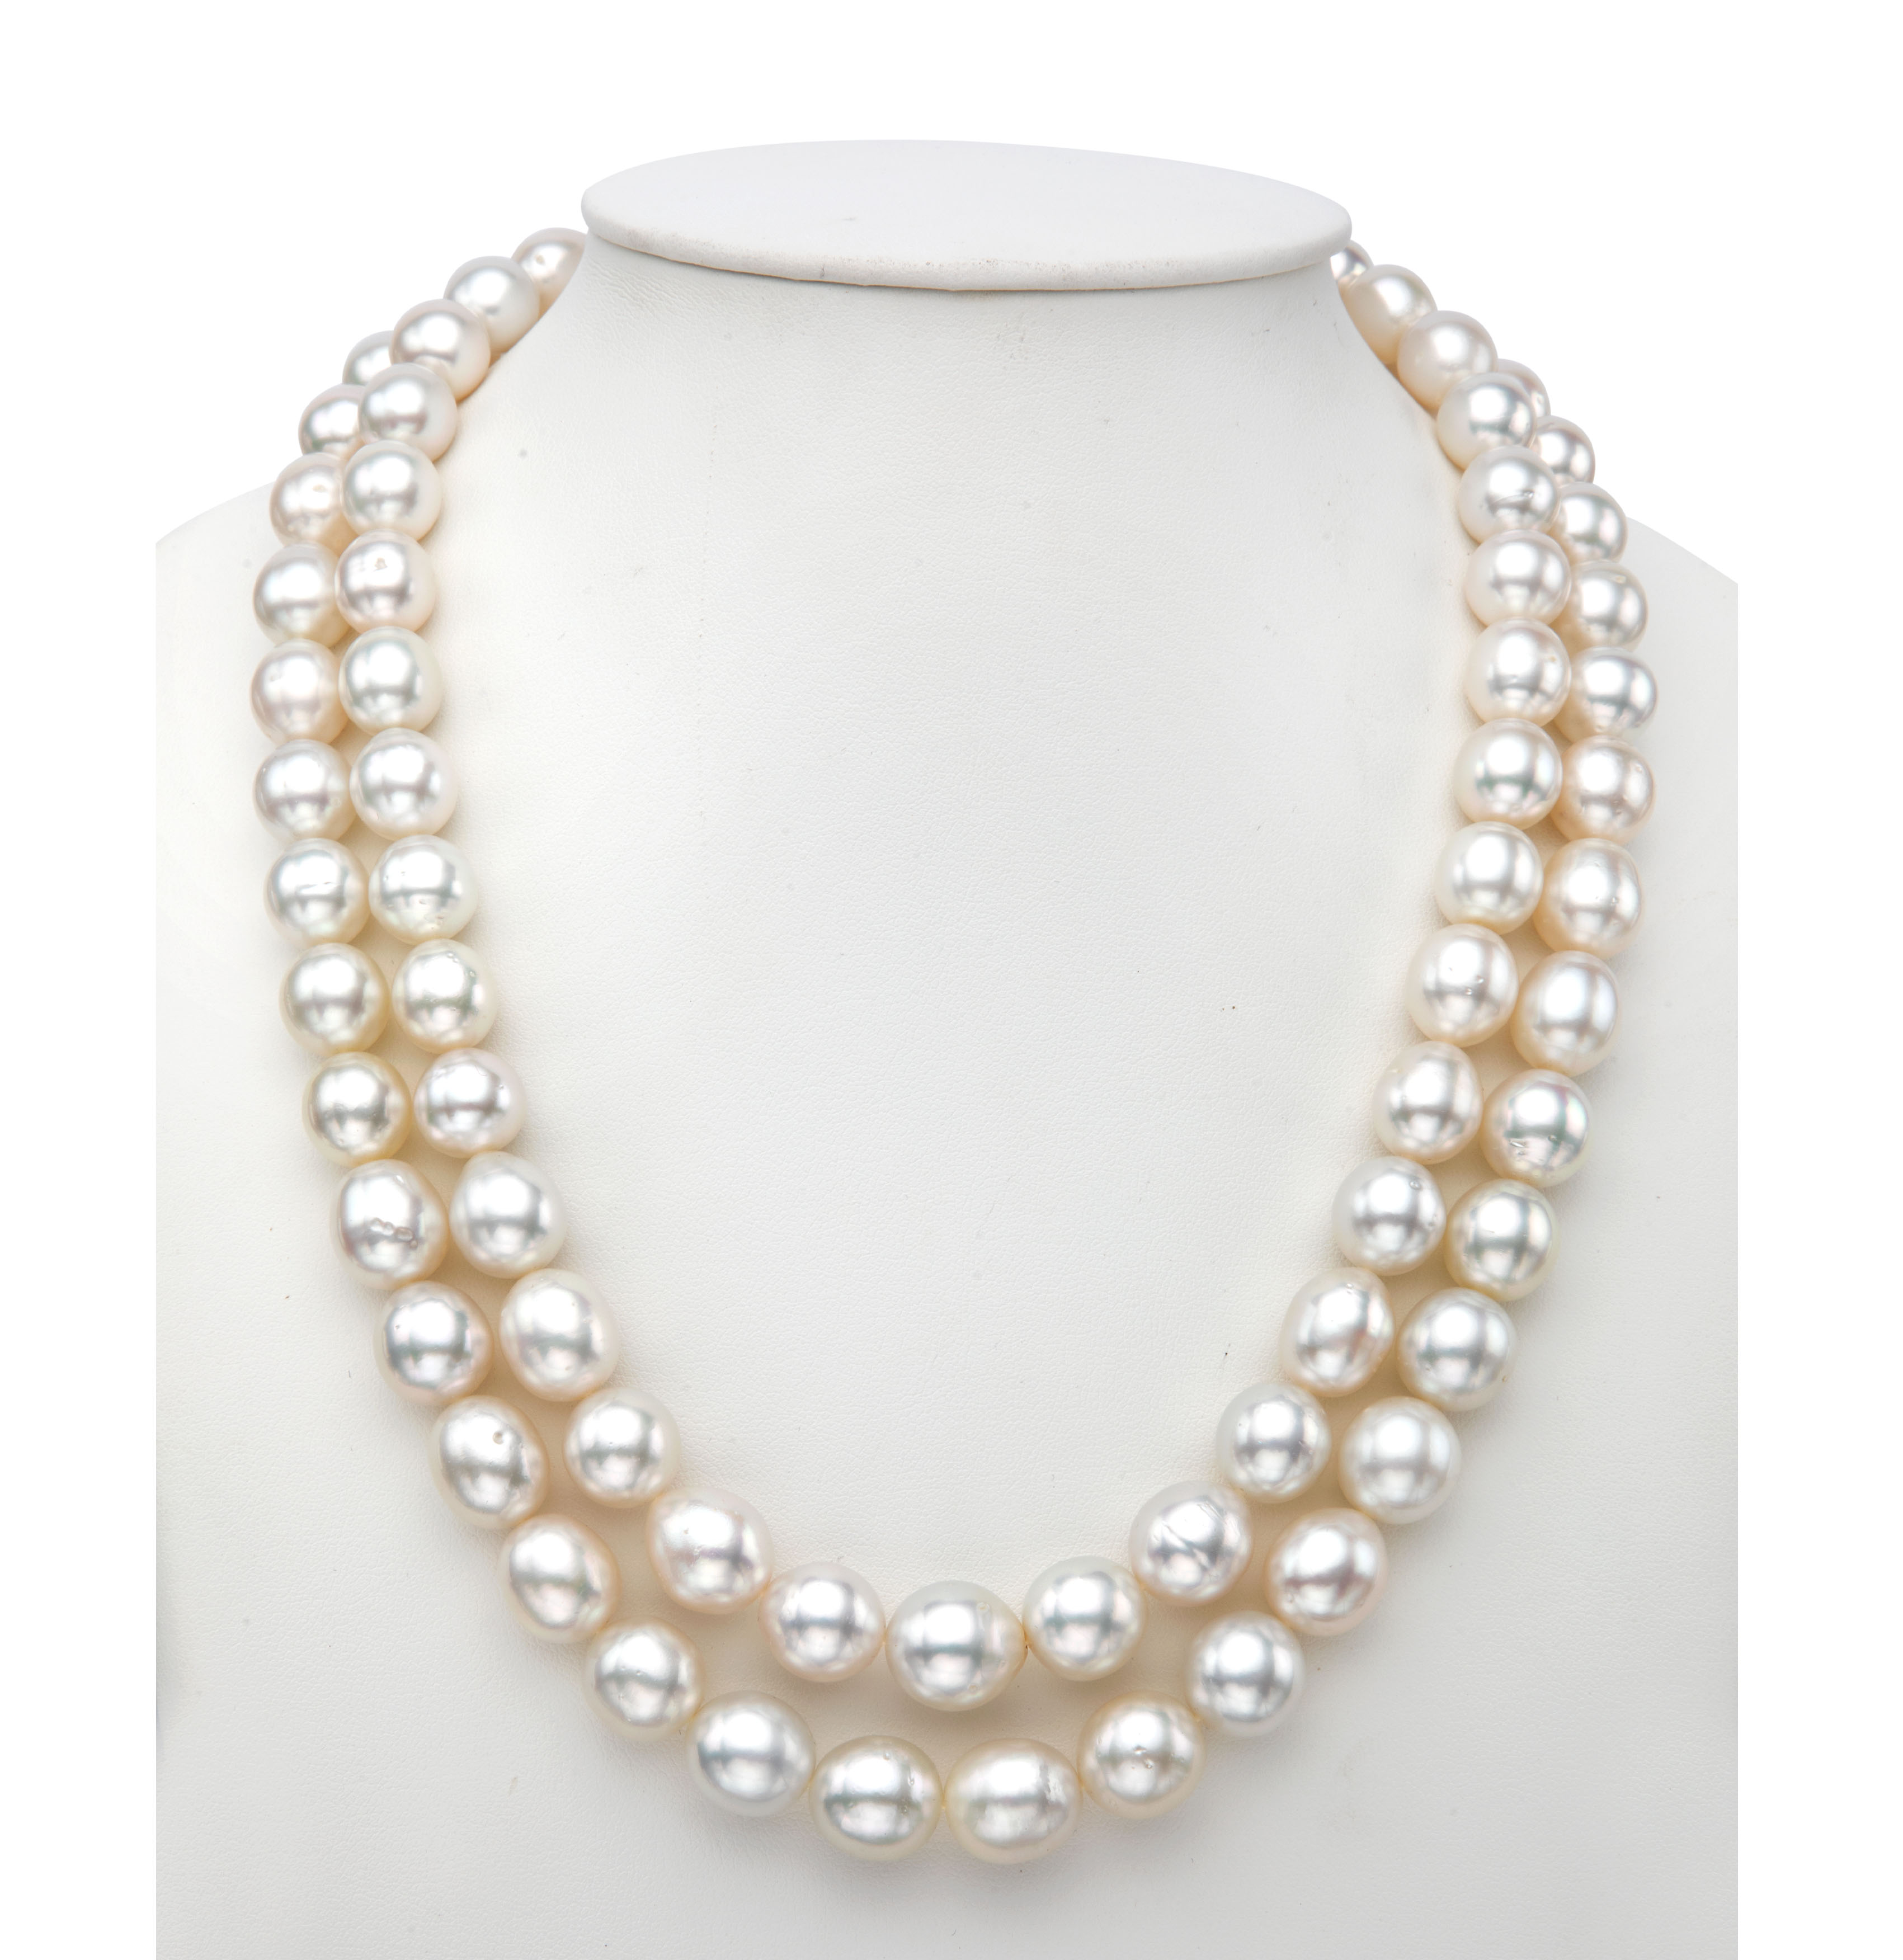 10.0-12.0mmWhite South Sea Pearls Necklace Set-AAA Quality